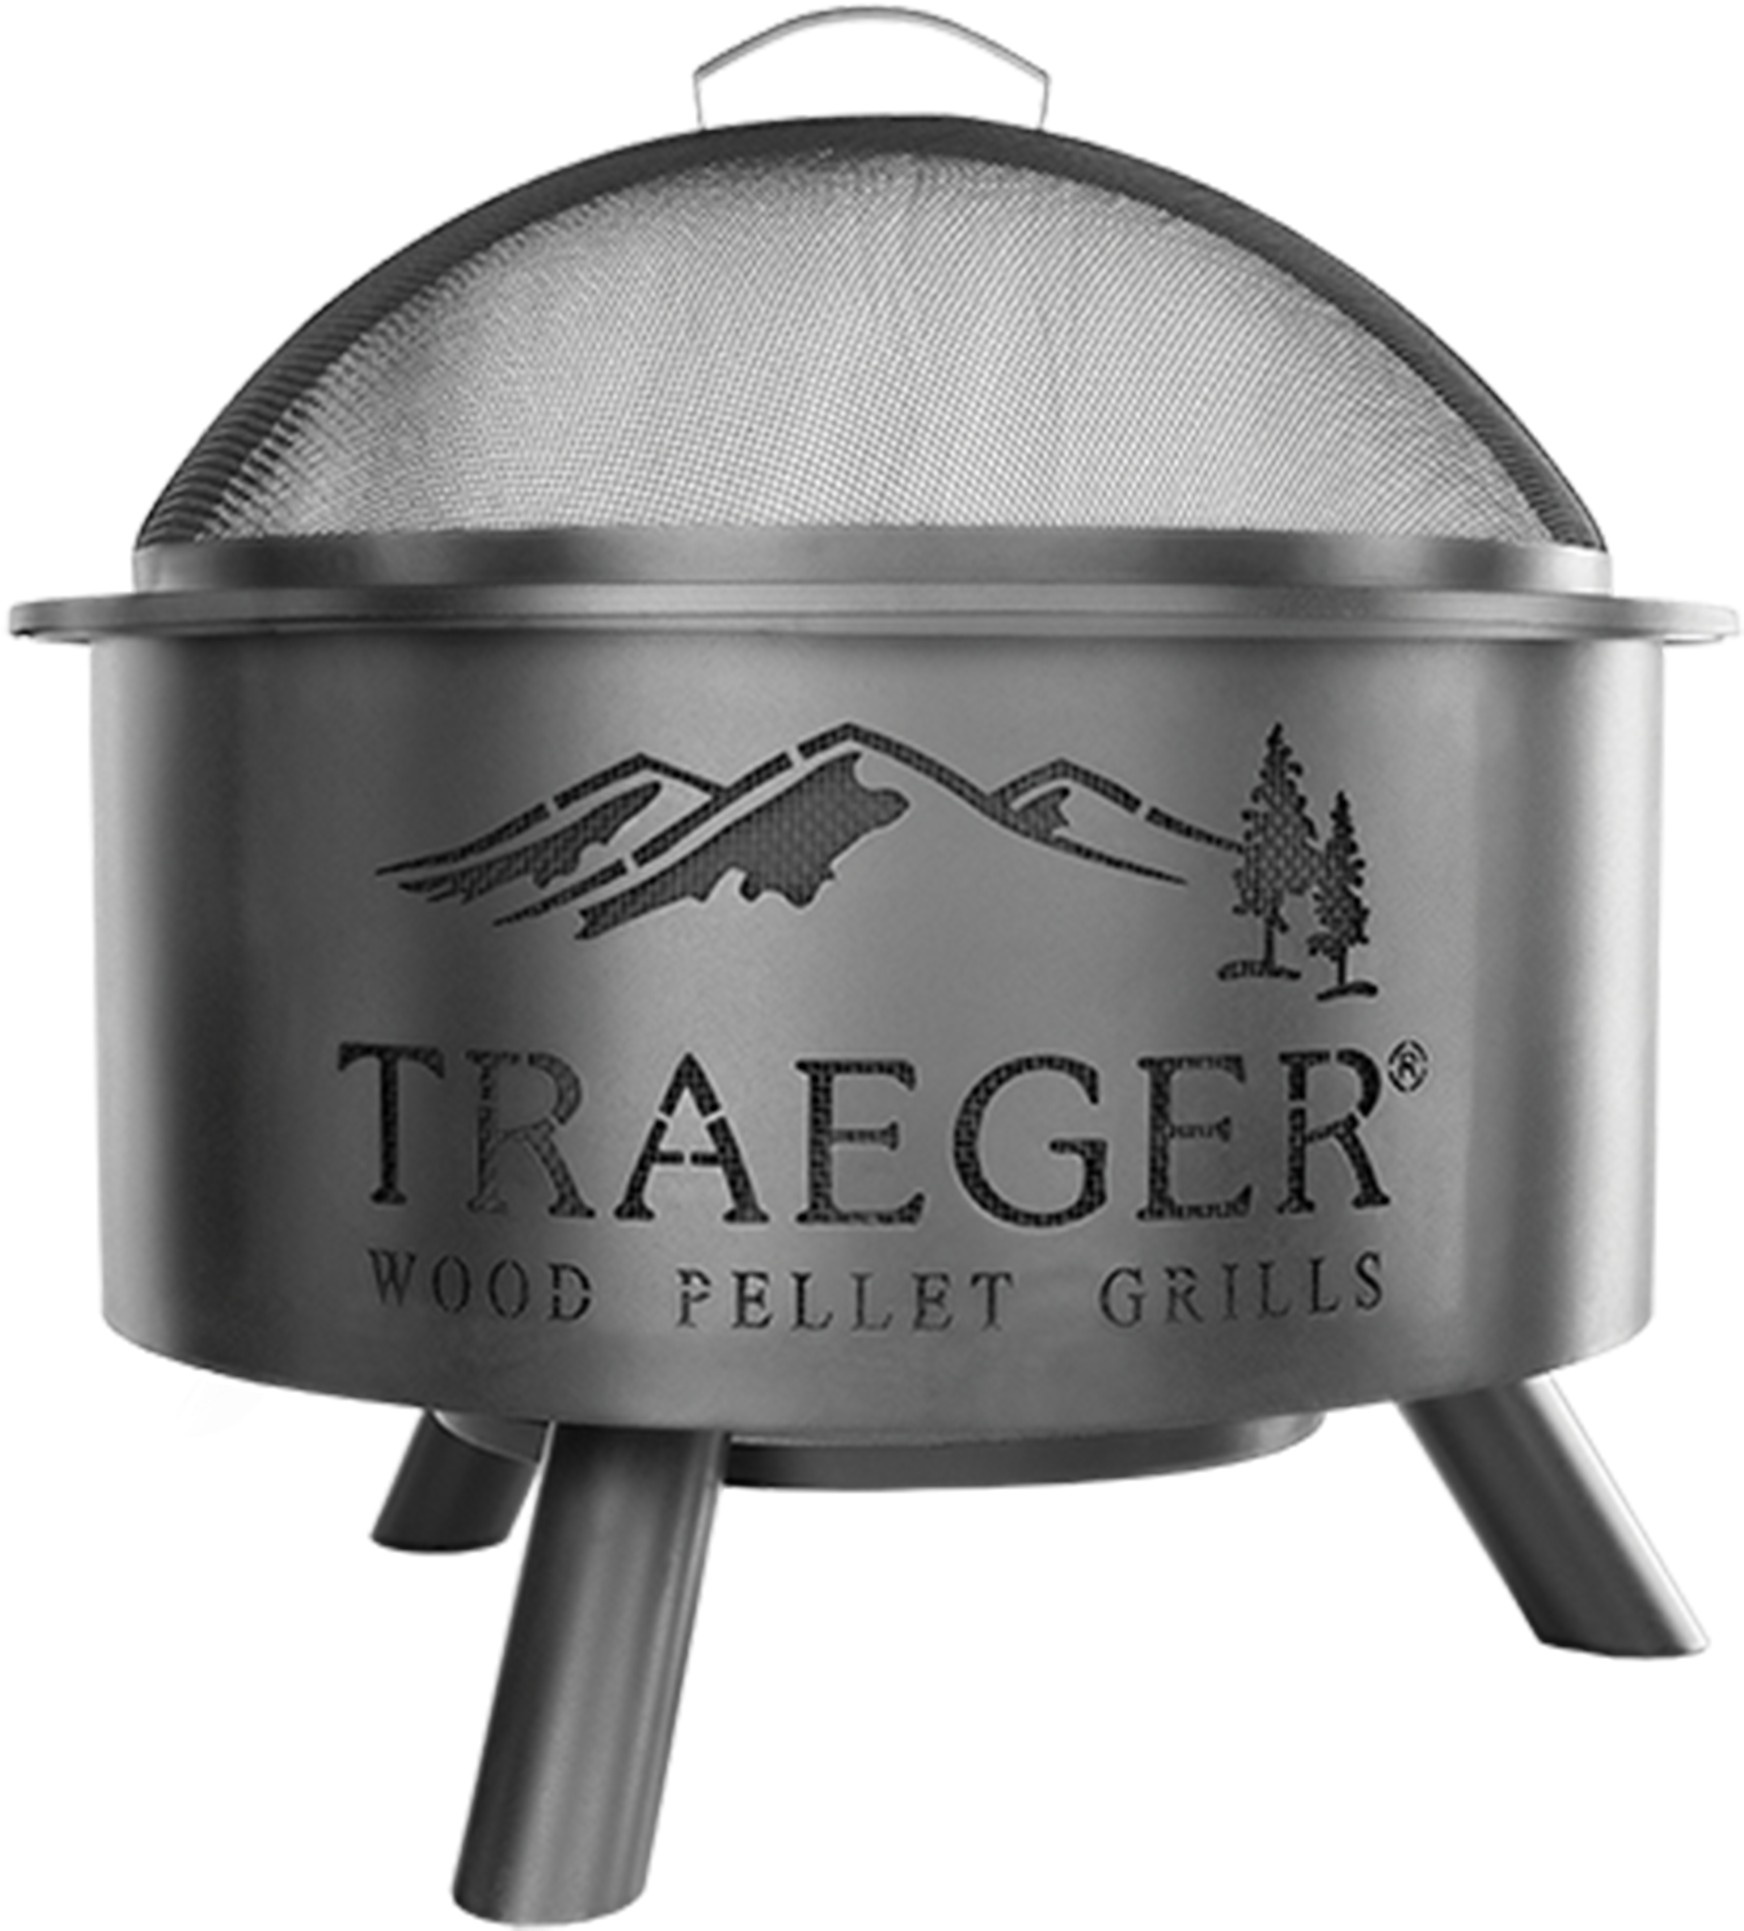 Pictures Gallery Of Luxury Traeger Outdoor Fire Pit - Traeger Wood Fired Grill (2000x2000)